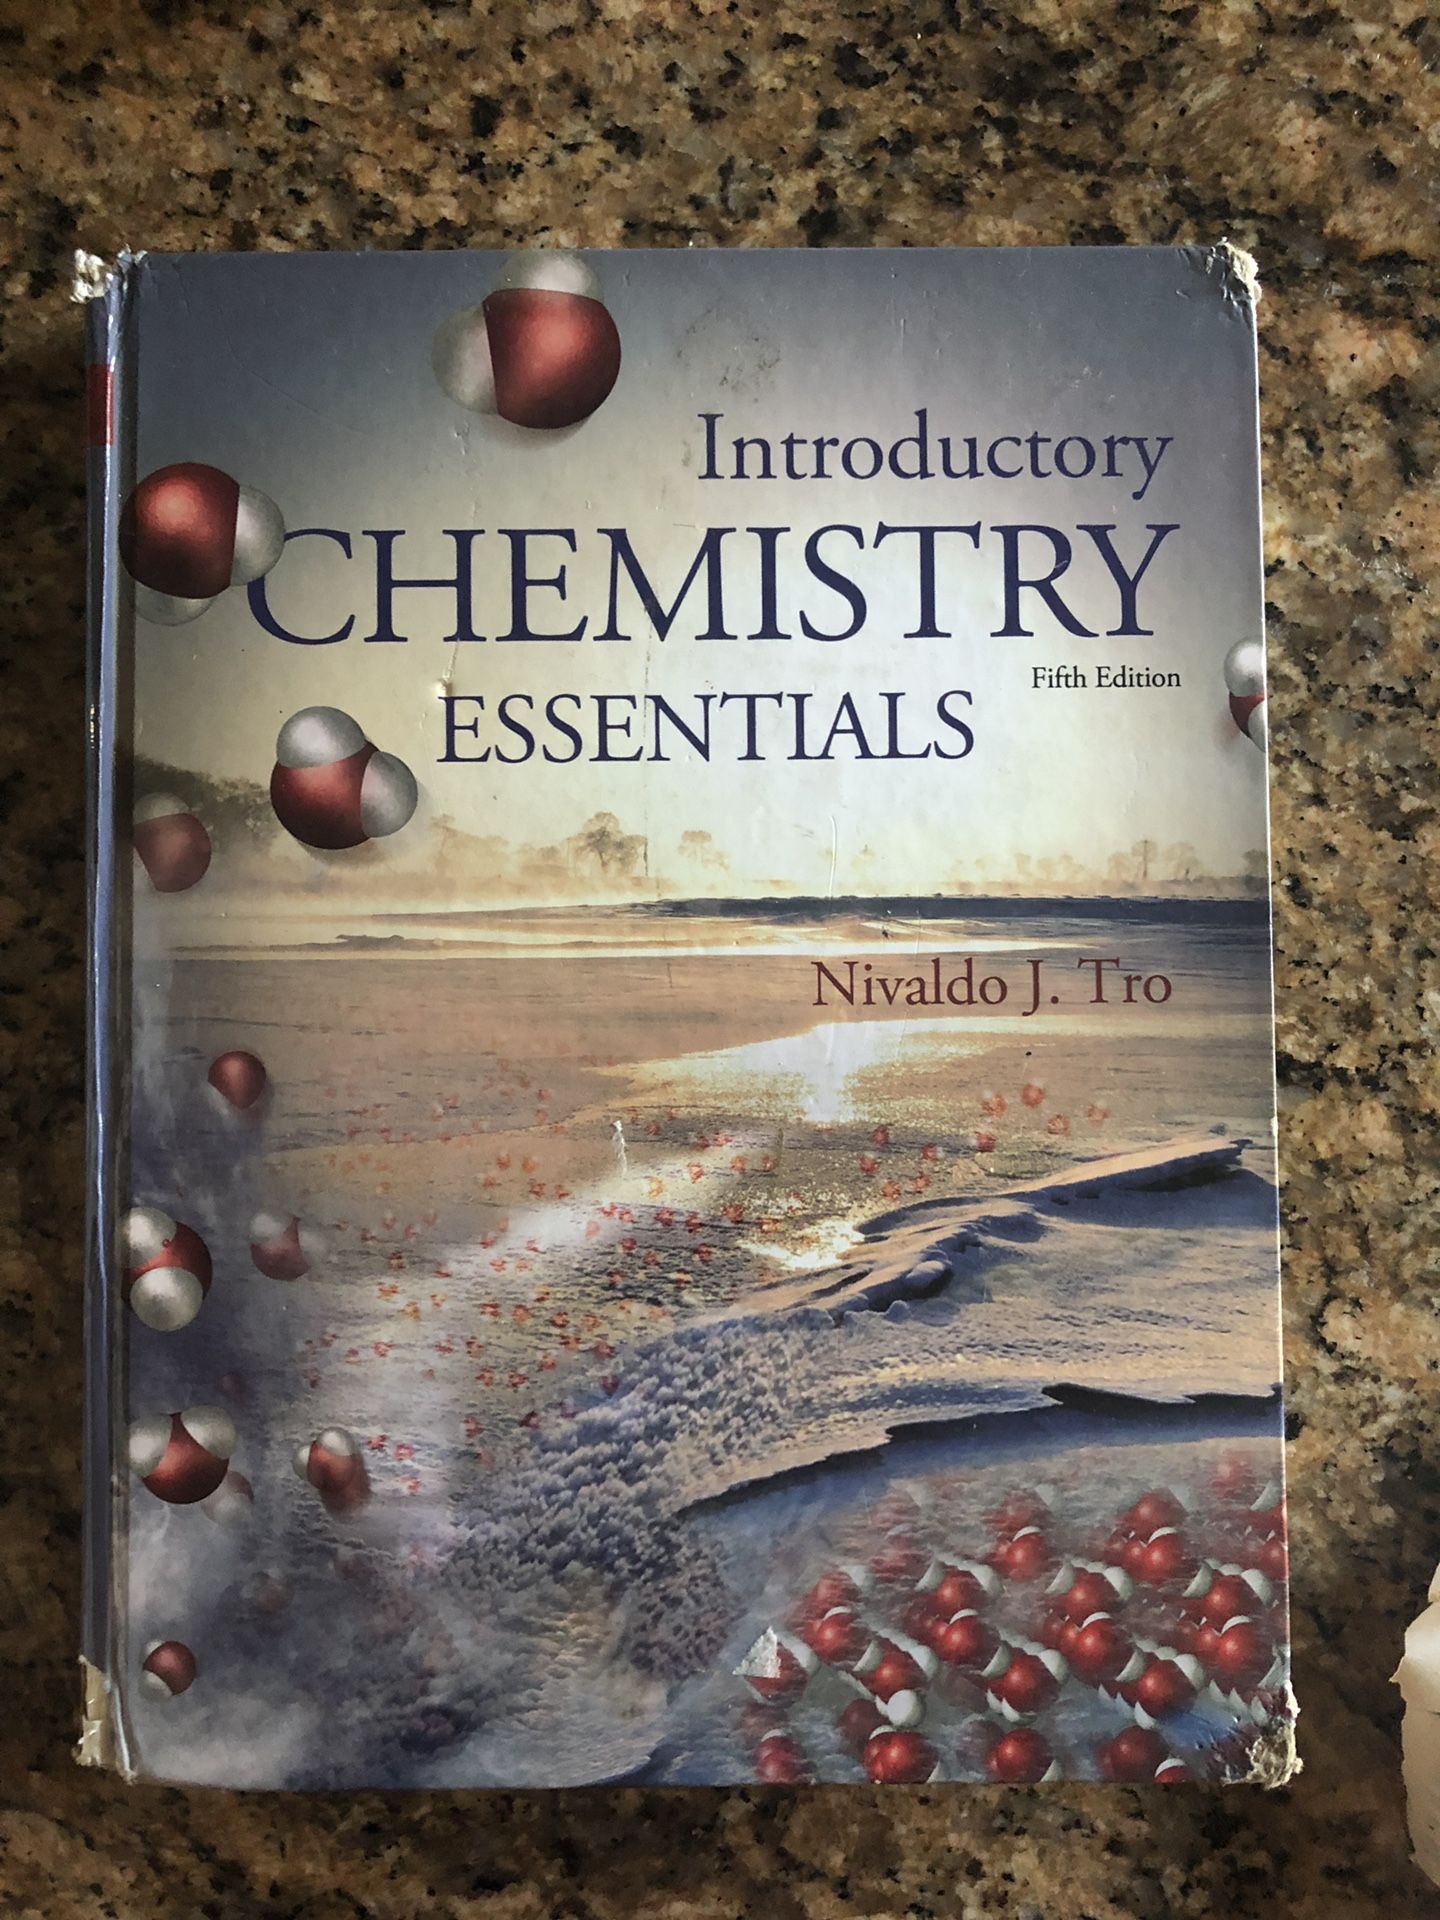 Introductory chemistry essentials (5th Edition)